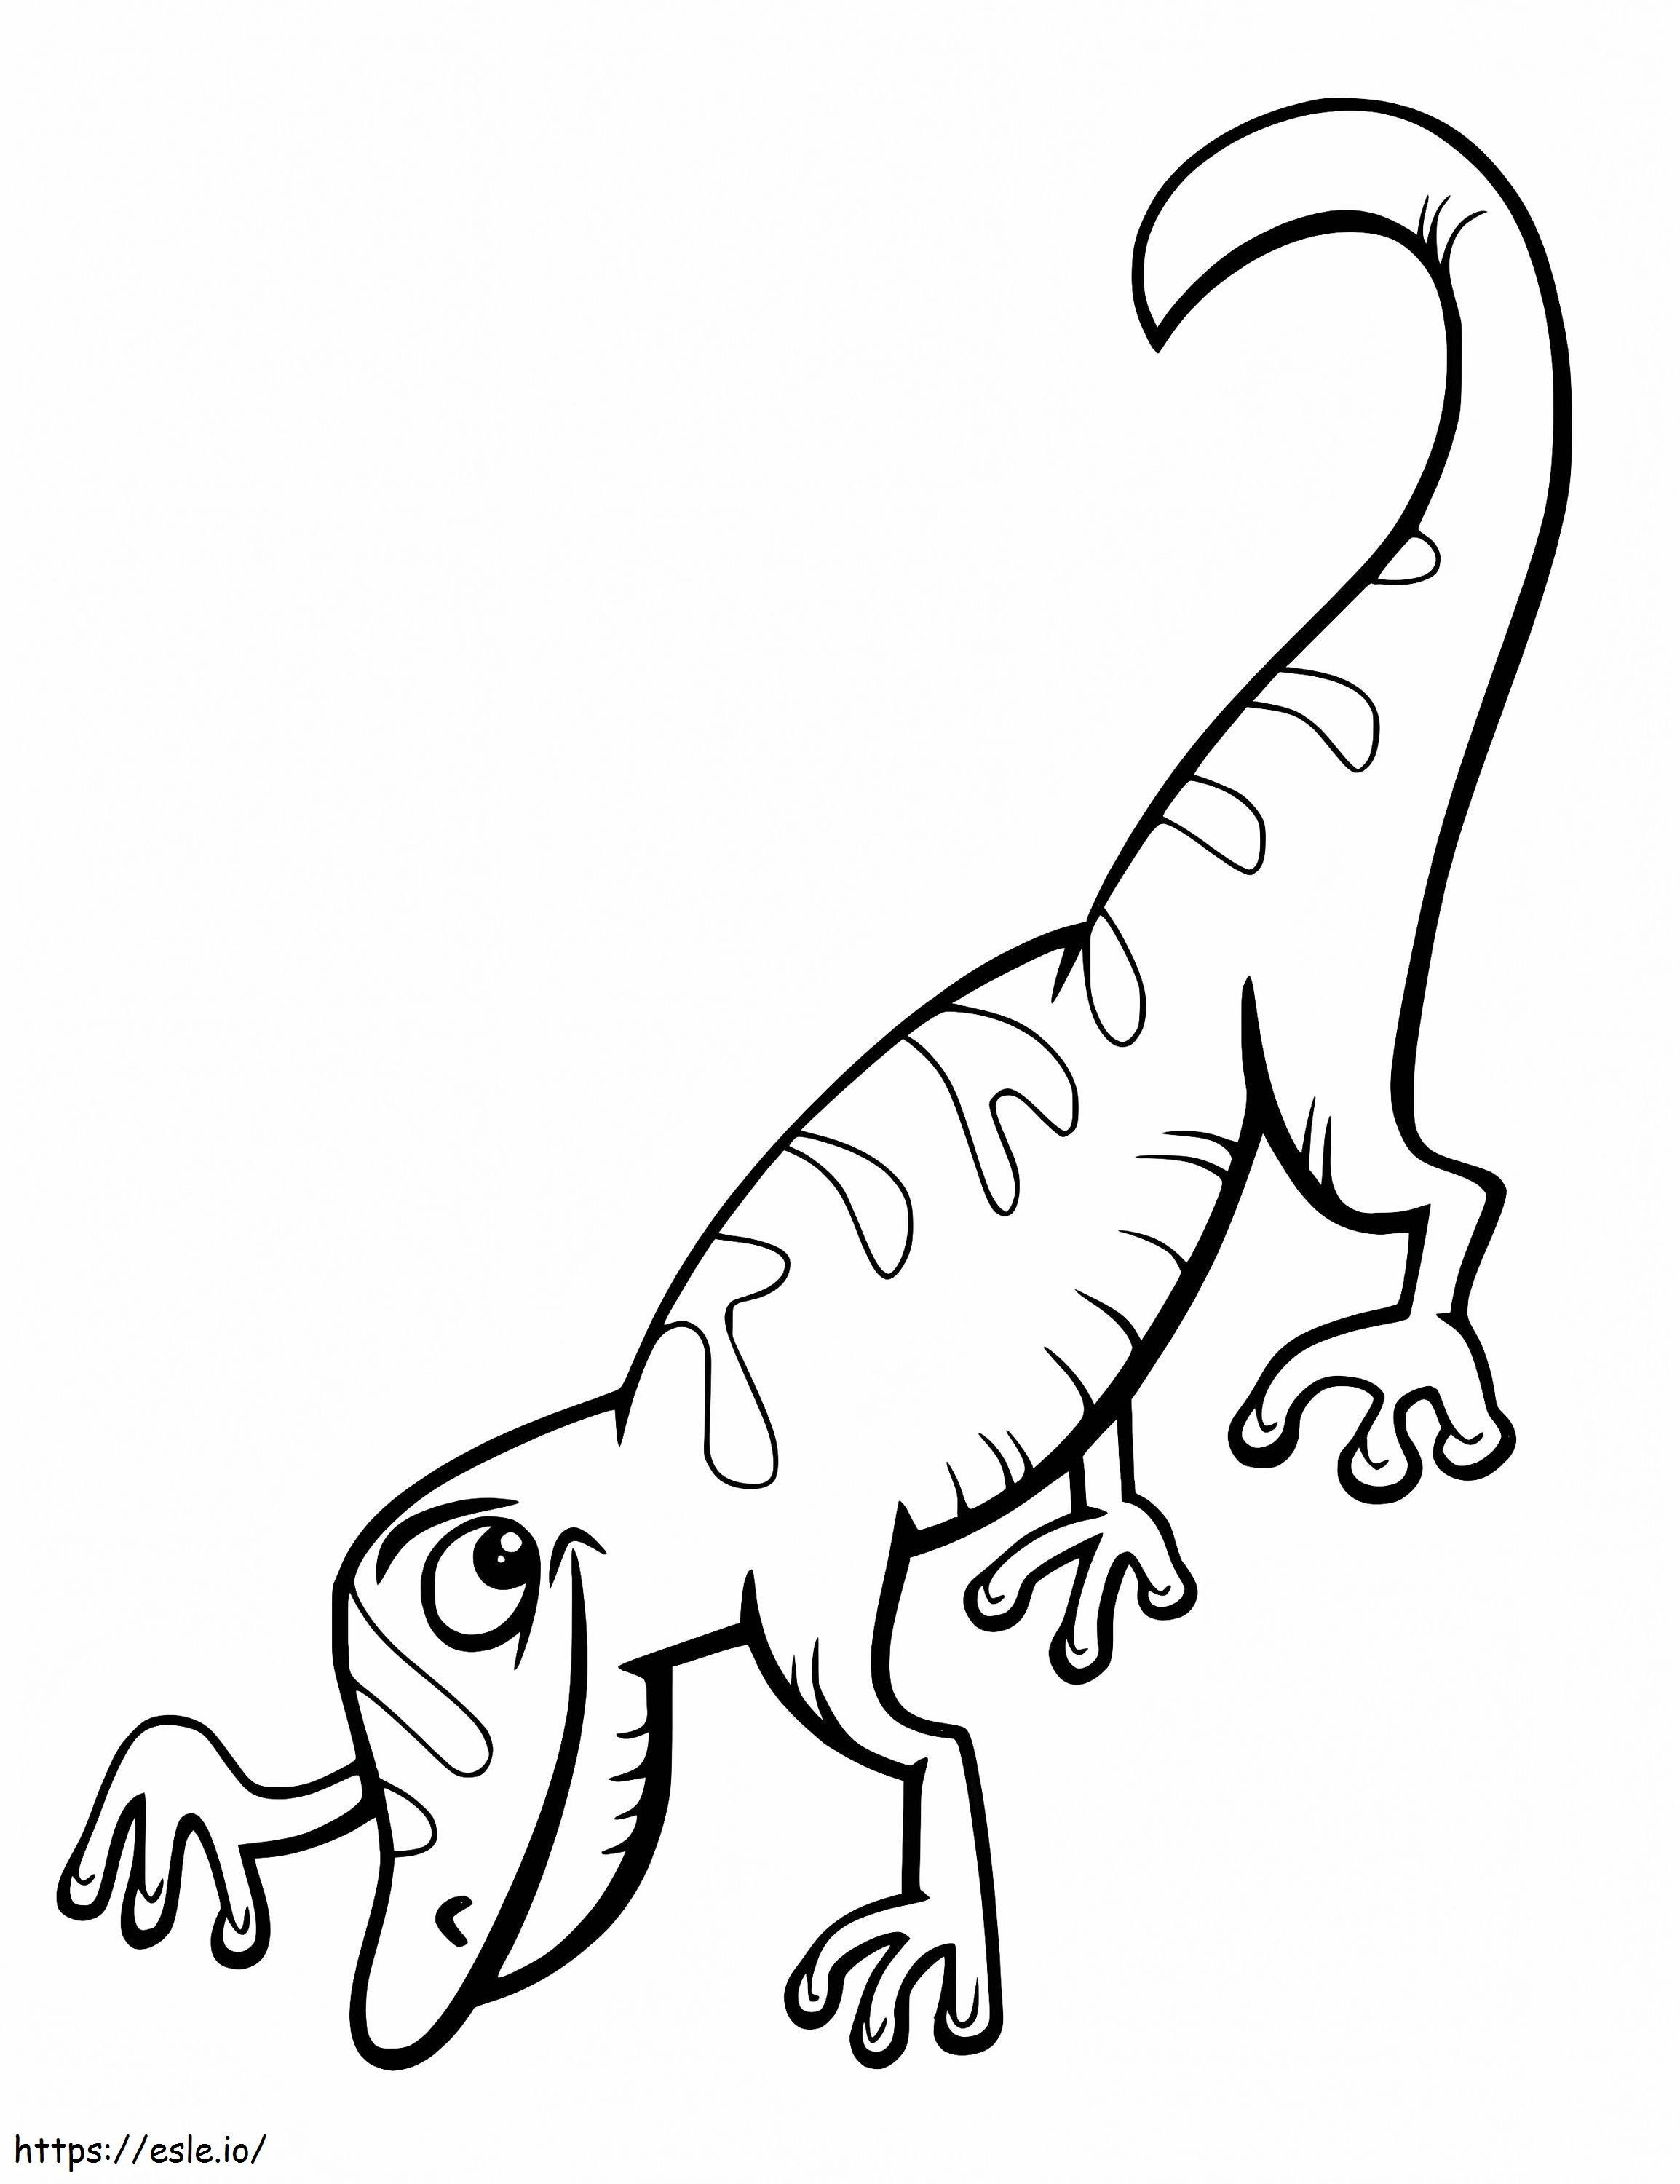 Smiling Gecko coloring page